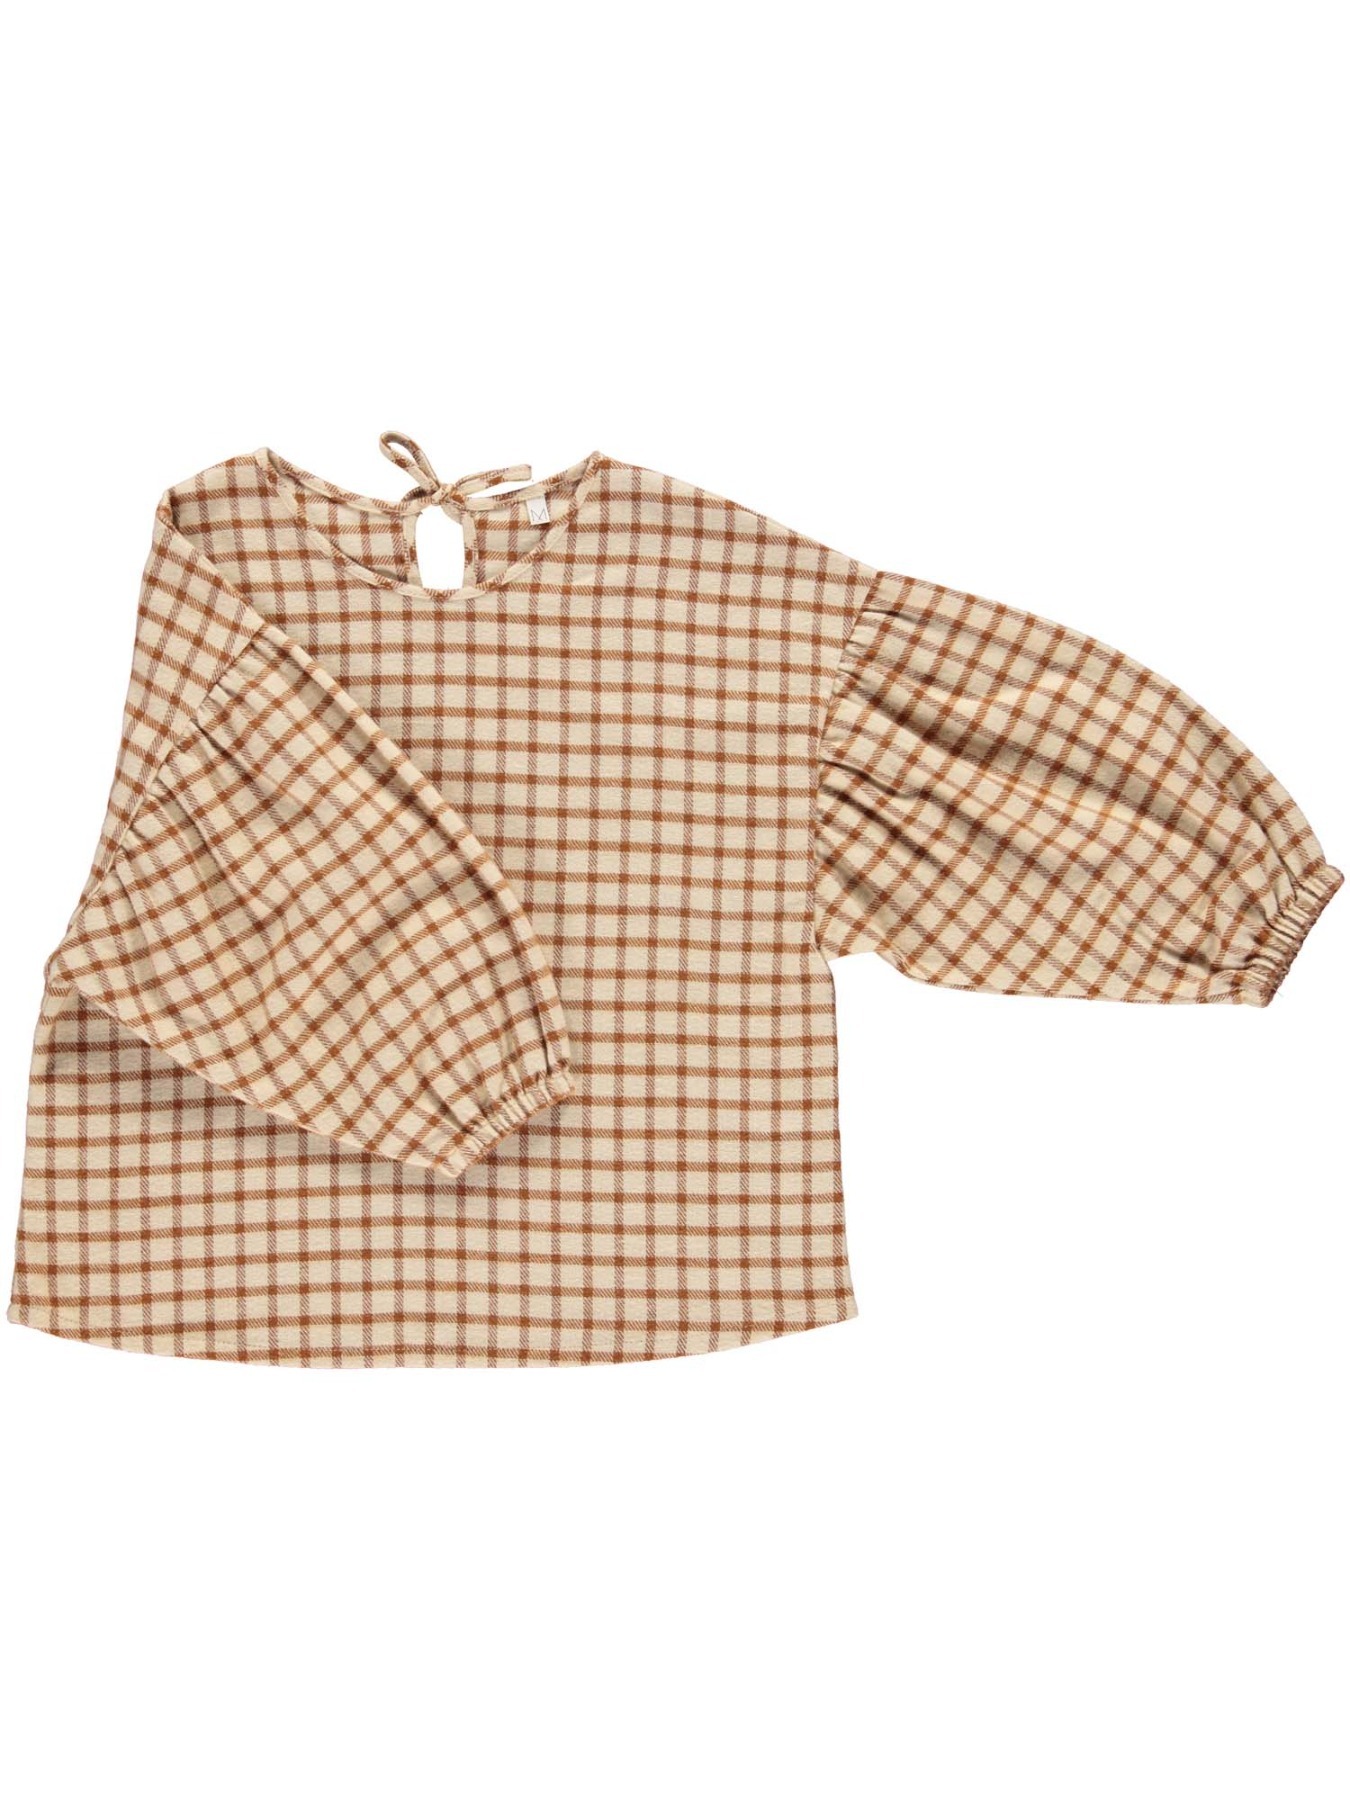 Monkind - Amber Check Puff Blouse - KIDS 3